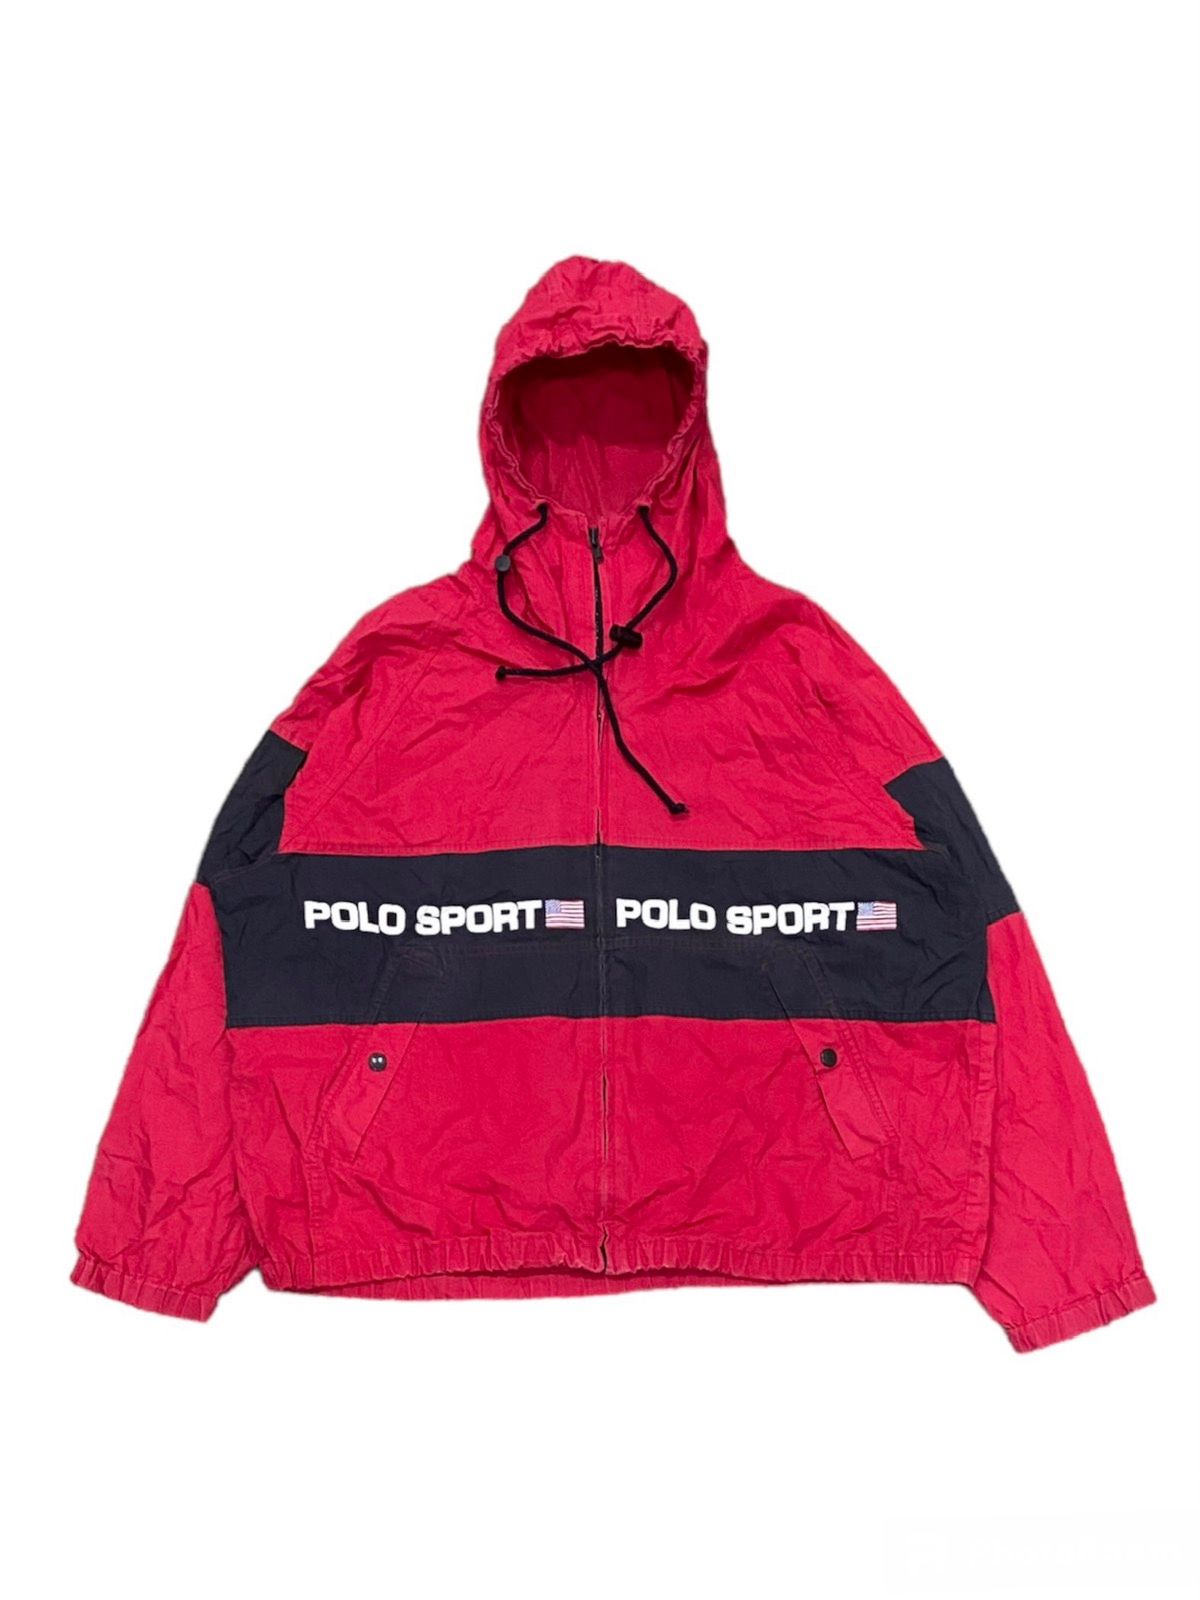 Vintage Polo Sport Ralph Lauren Spell Out Jacket - 1